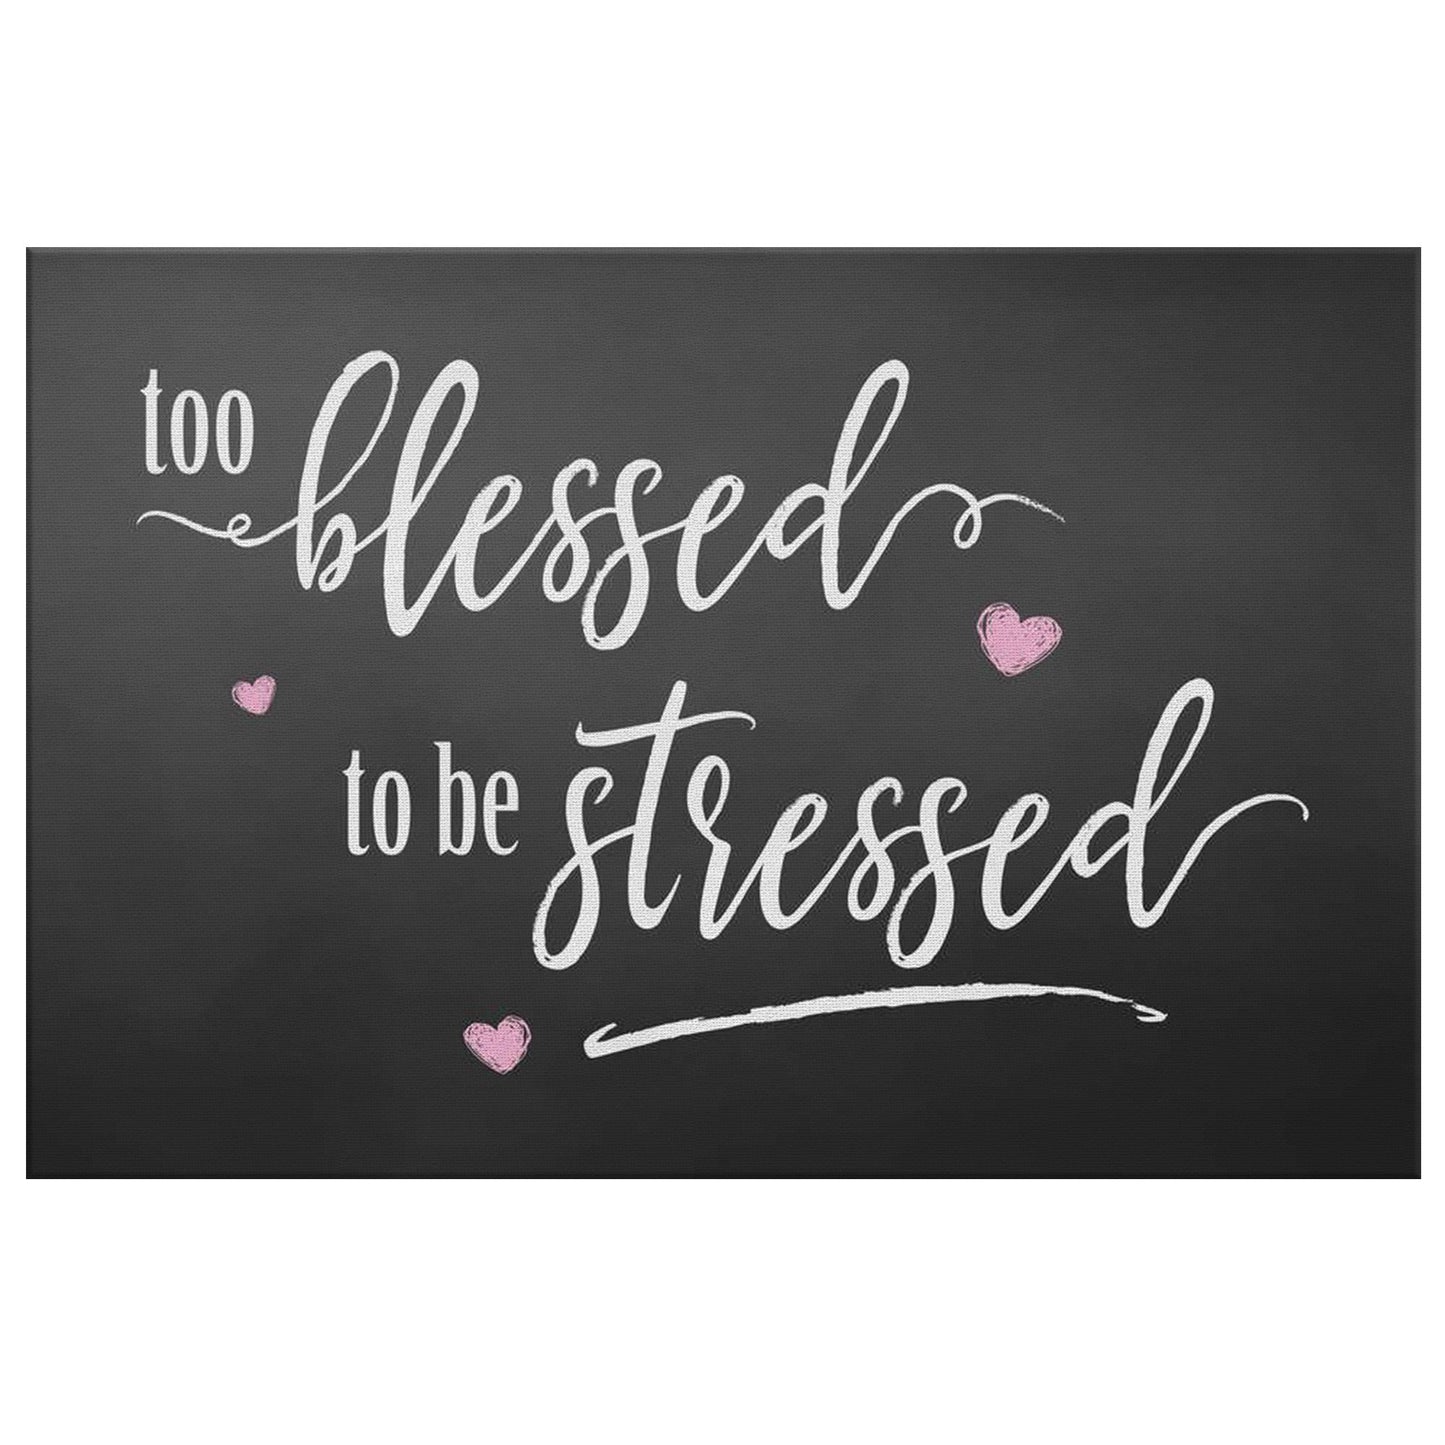 Too Blessed To Be Stressed Rustic Farmhouse Chalkboard Style Canvas Wall Art for the Home